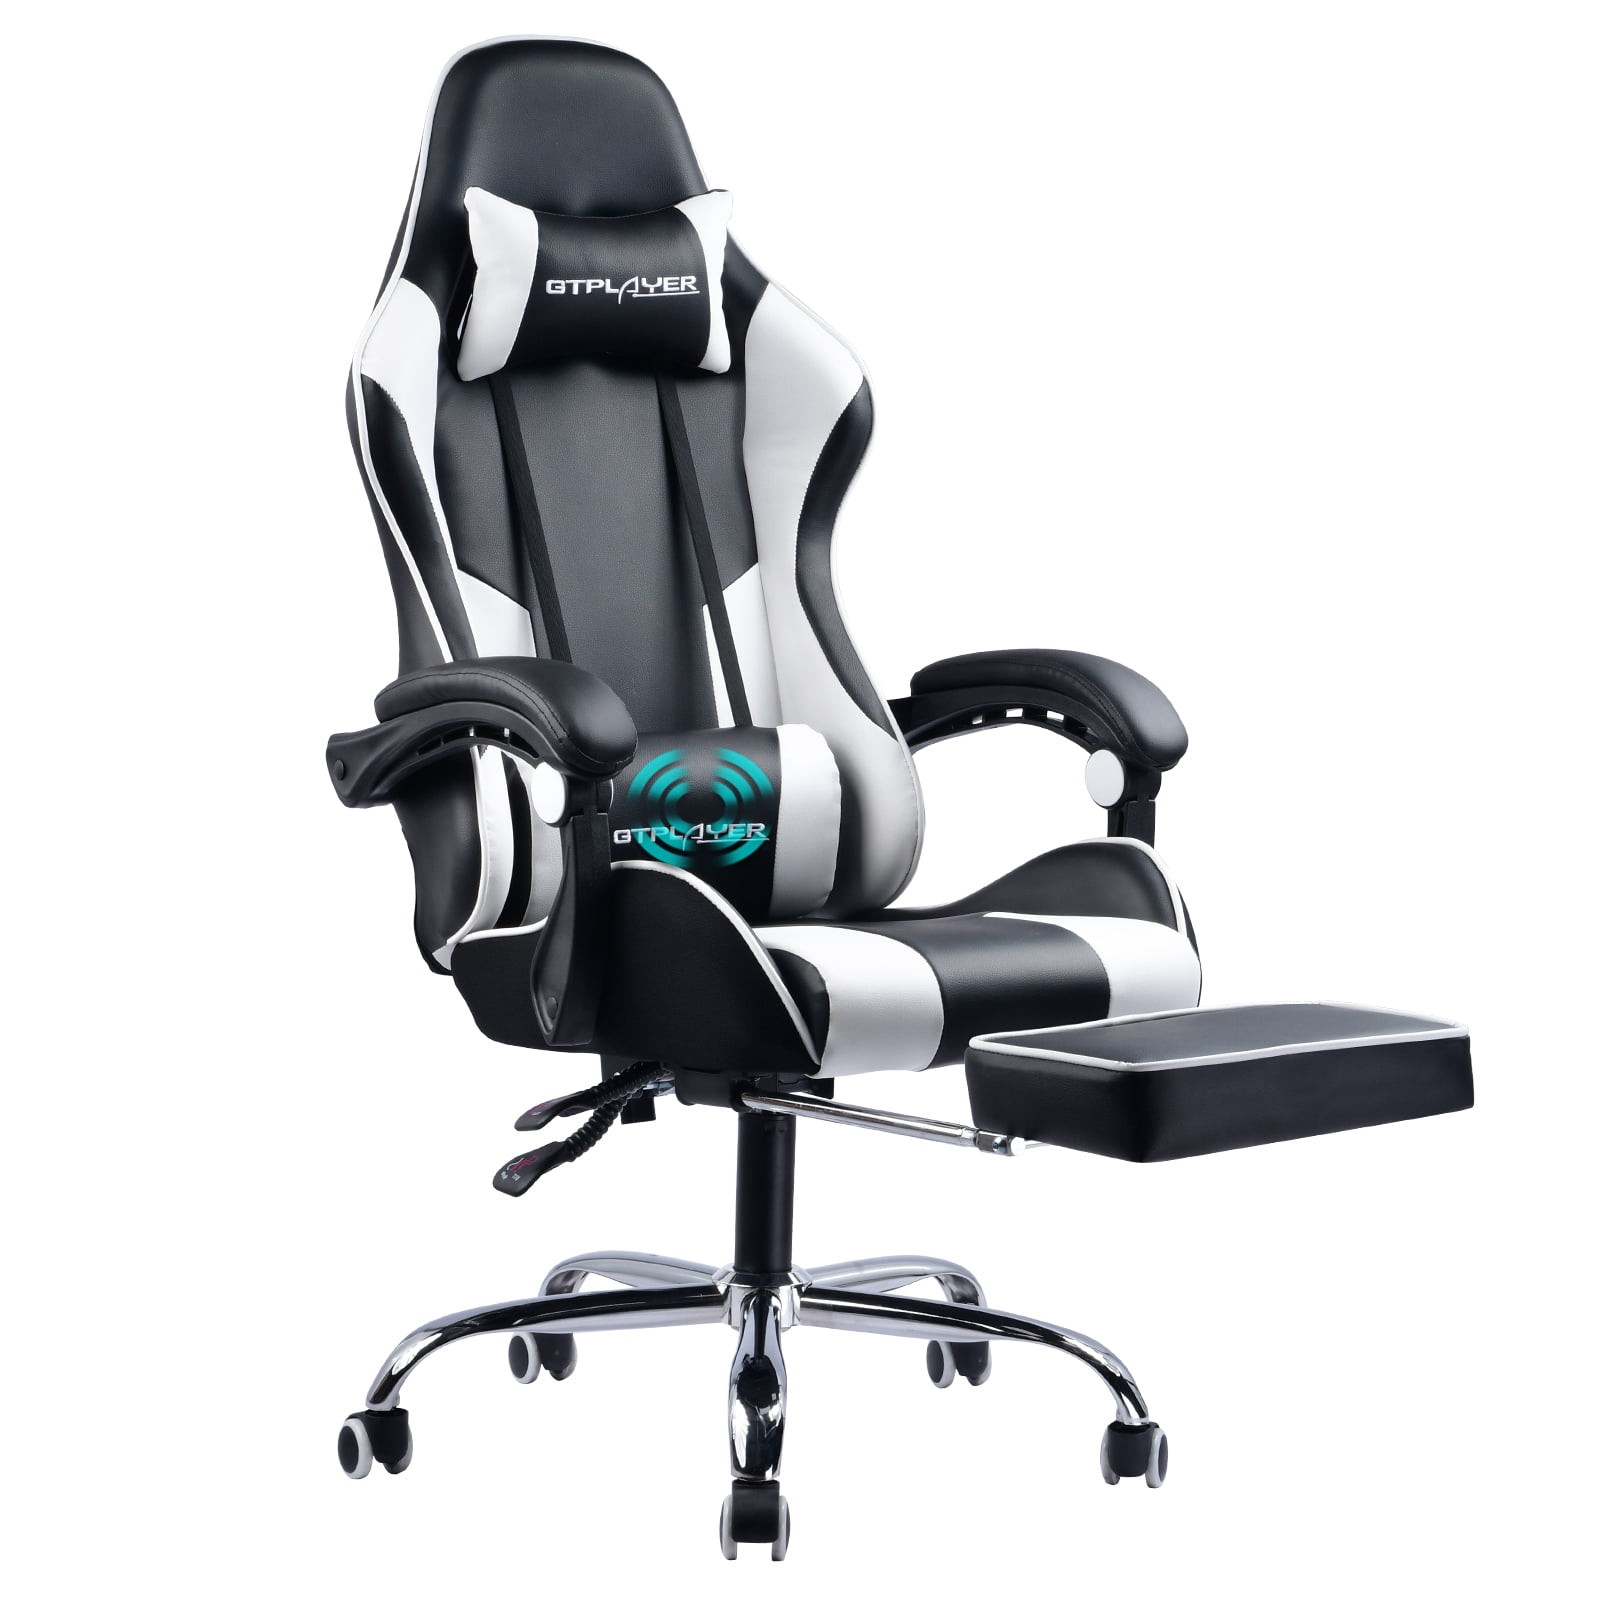 GTPLAYER Gaming Chair With Footrest Heavy Duty Desk Chair High Back Support Computer Chair Swivel Rocking Executive Chair Black